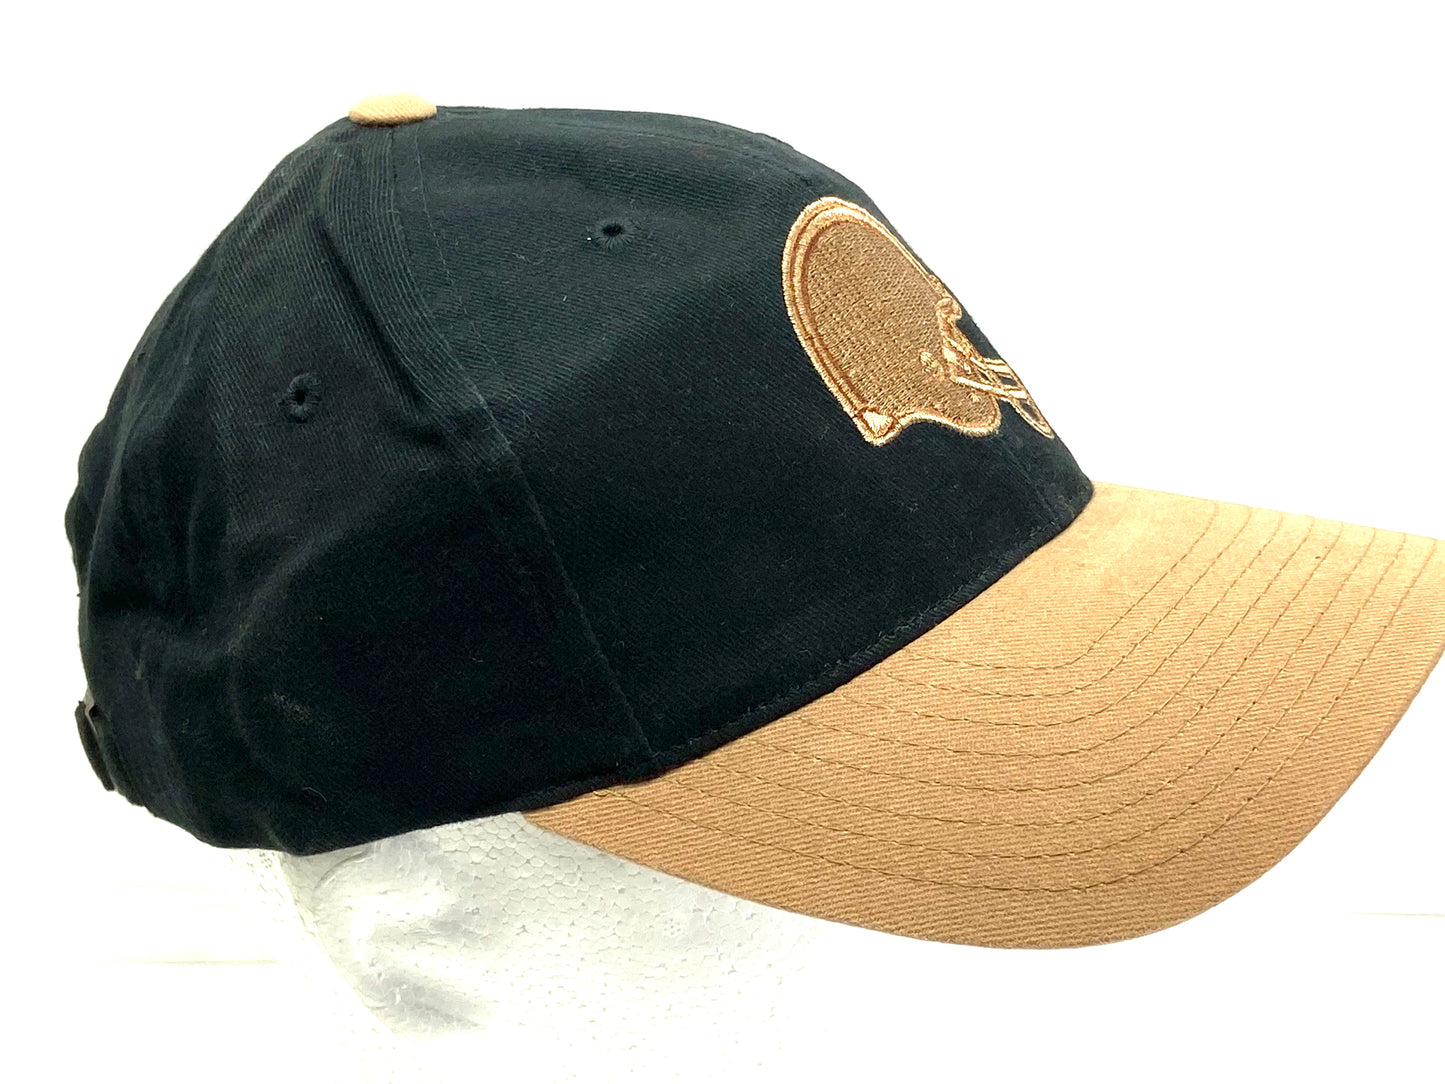 Cleveland Browns Vintage NFL Tan Logo On Black Cap by American Needle